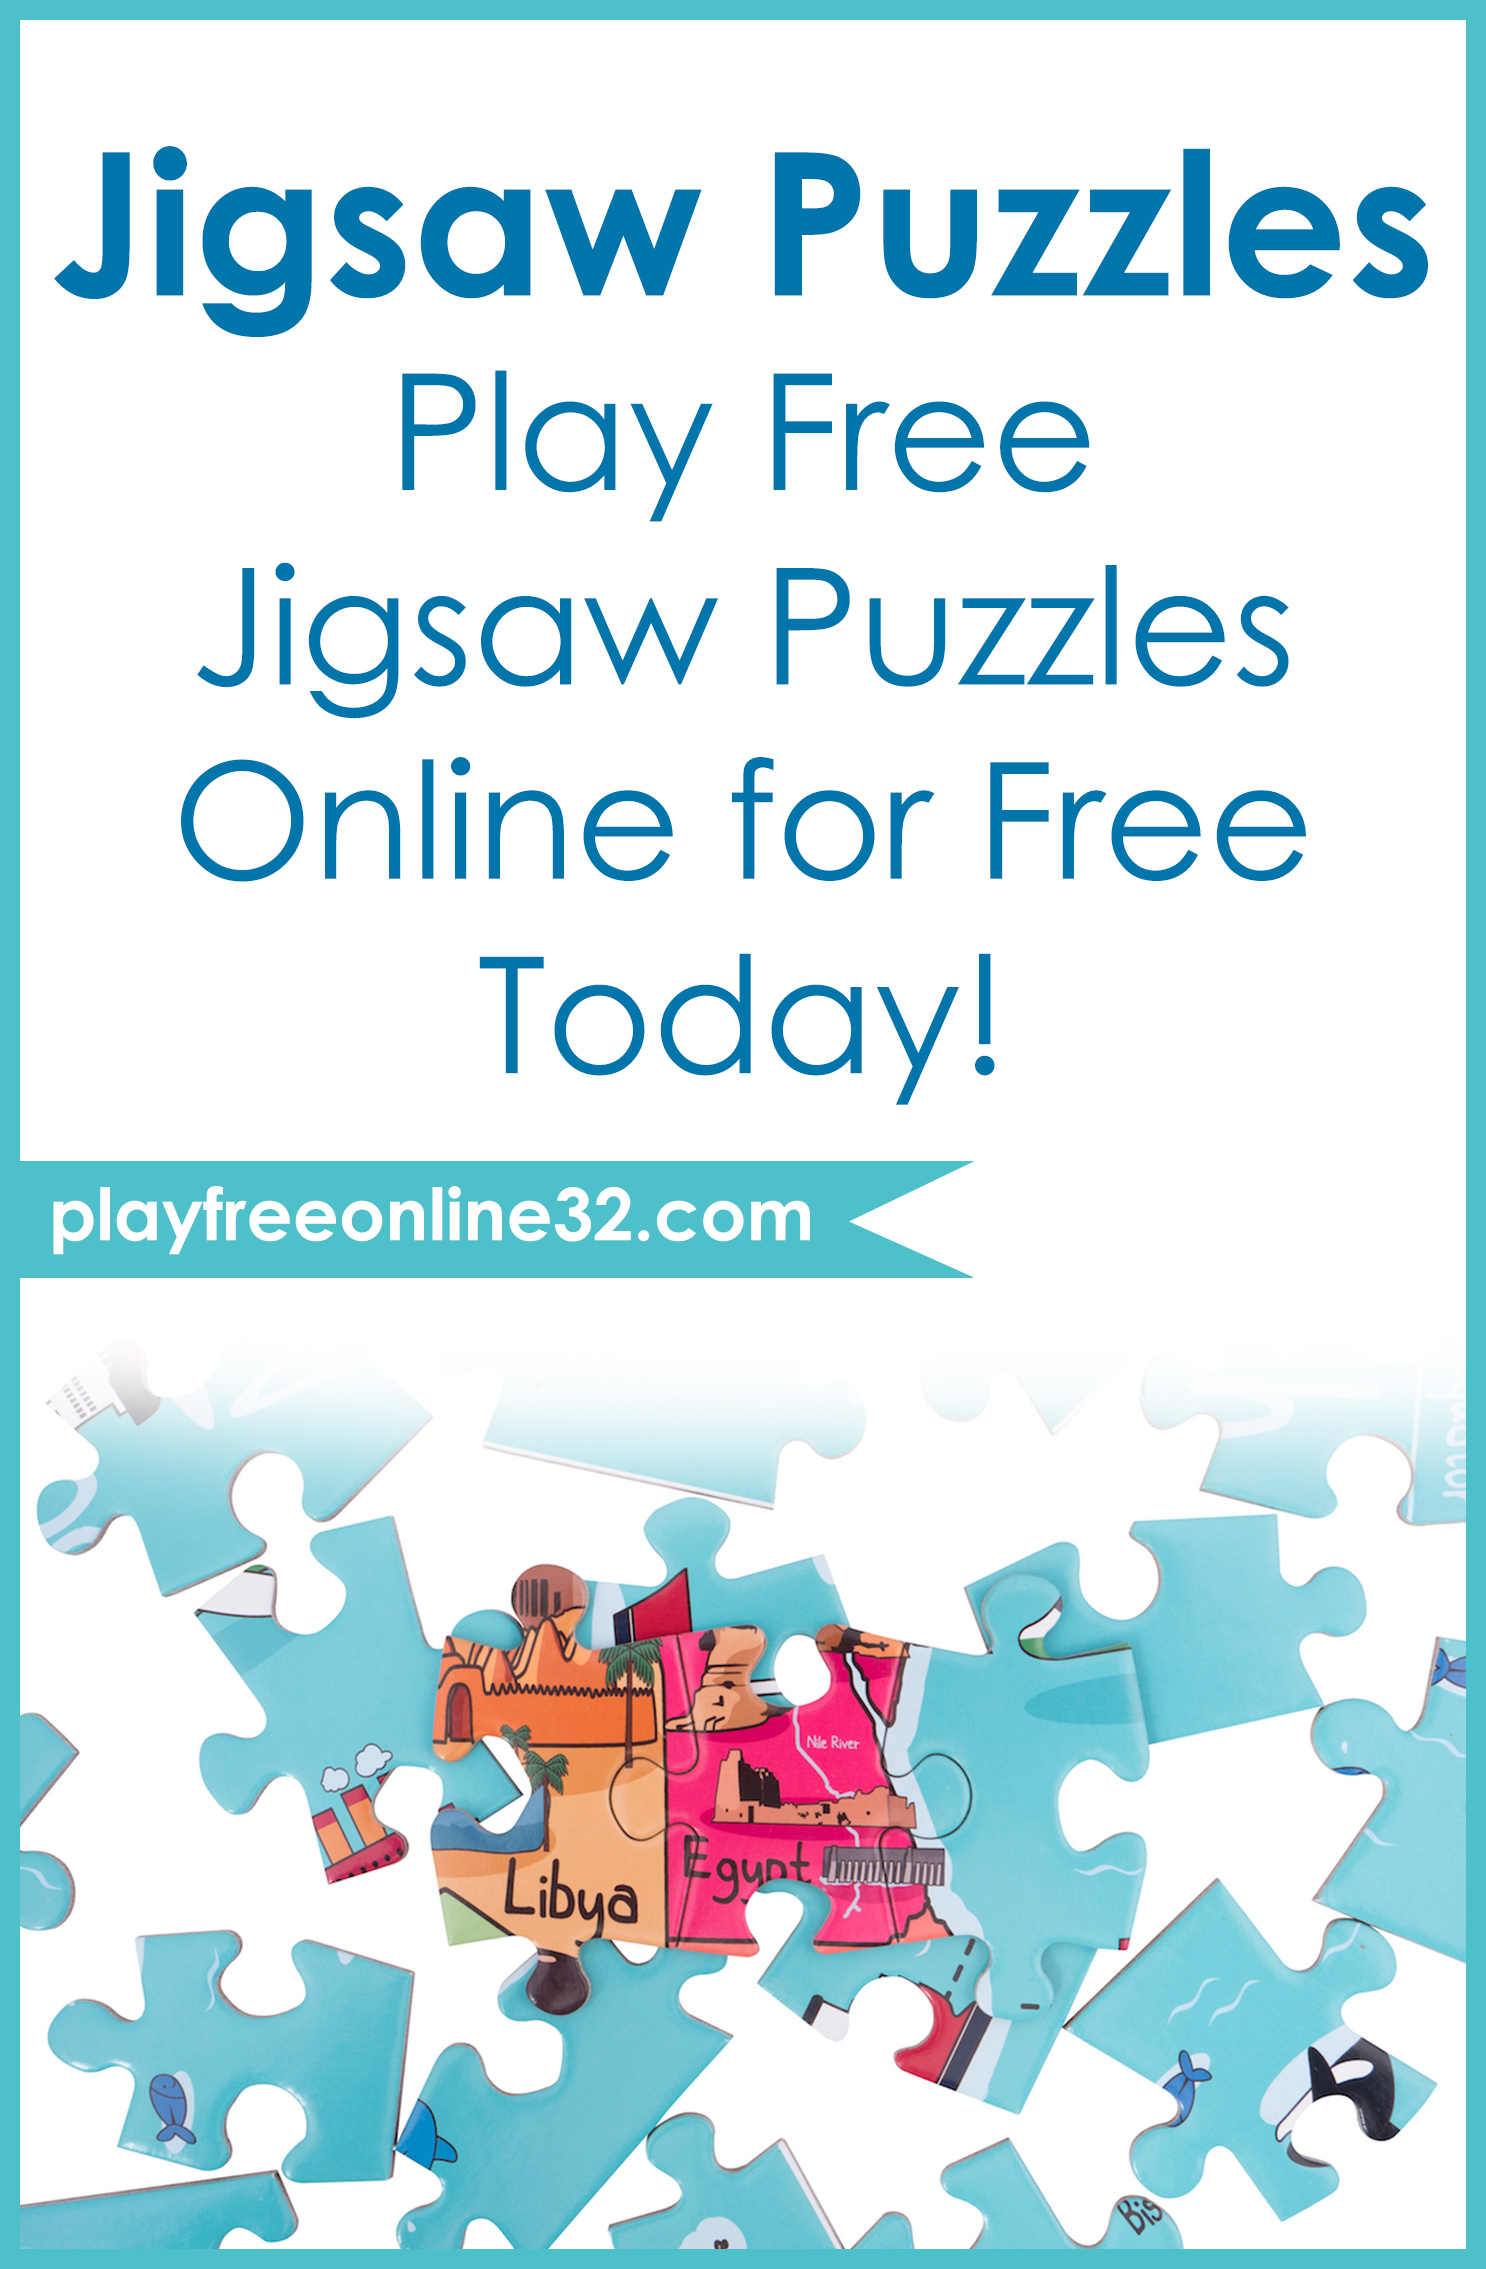 Jigsaw Puzzles Online • Play Free Jigsaw Puzzles Online for Free Today!